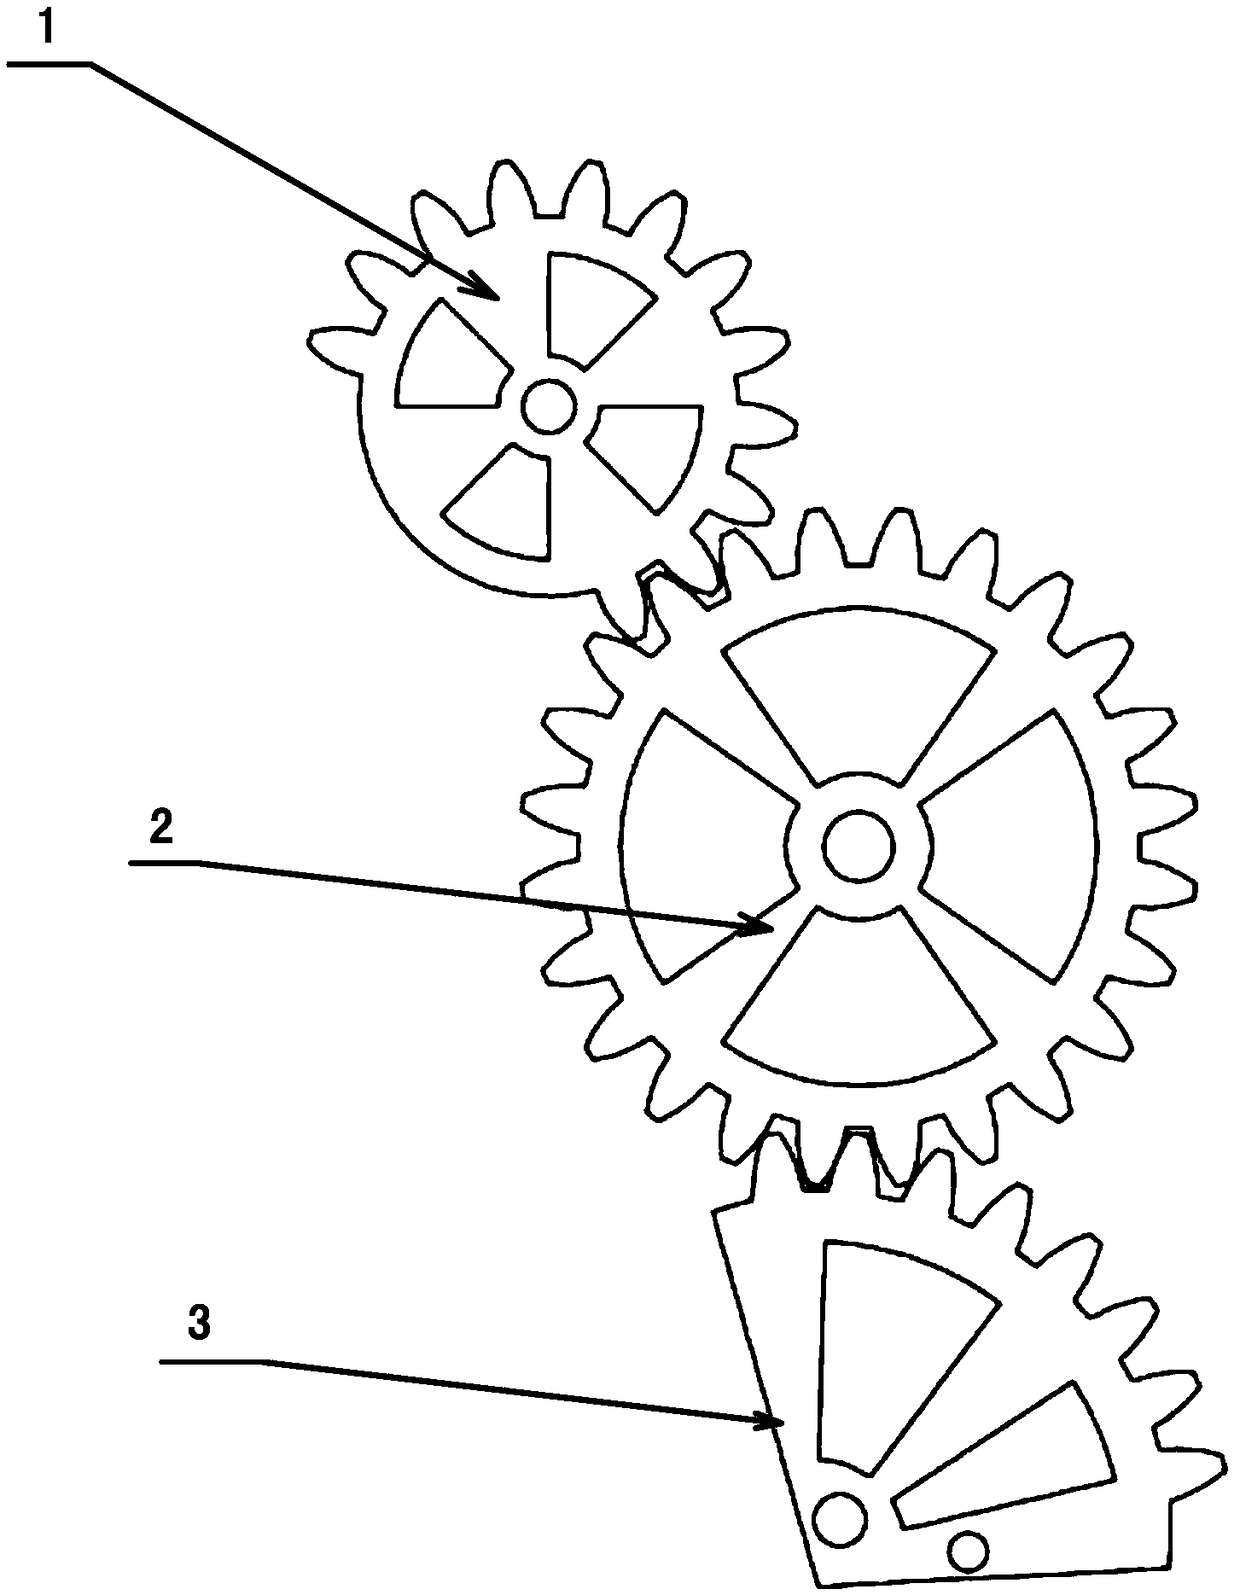 Bouncing leg based on incomplete set of gears